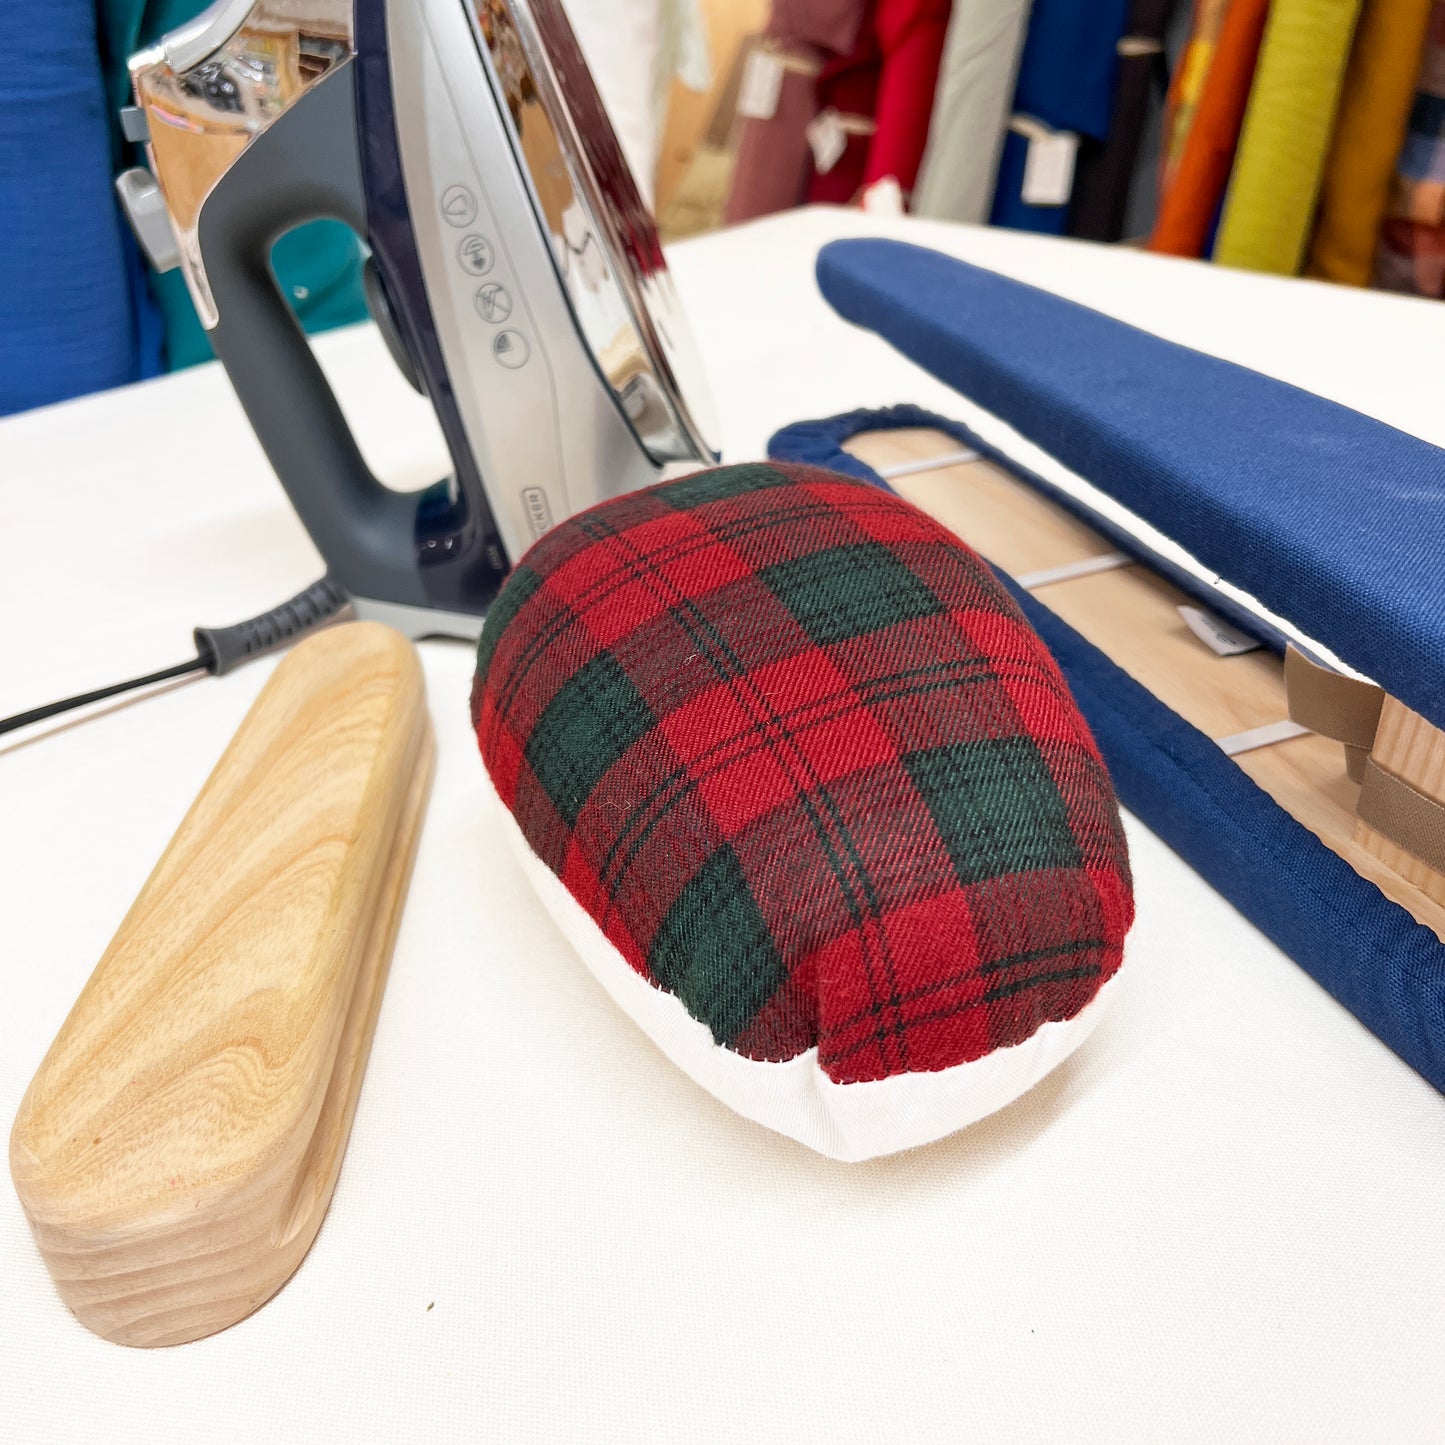 Skills: Ironing Tools and How to Use Them